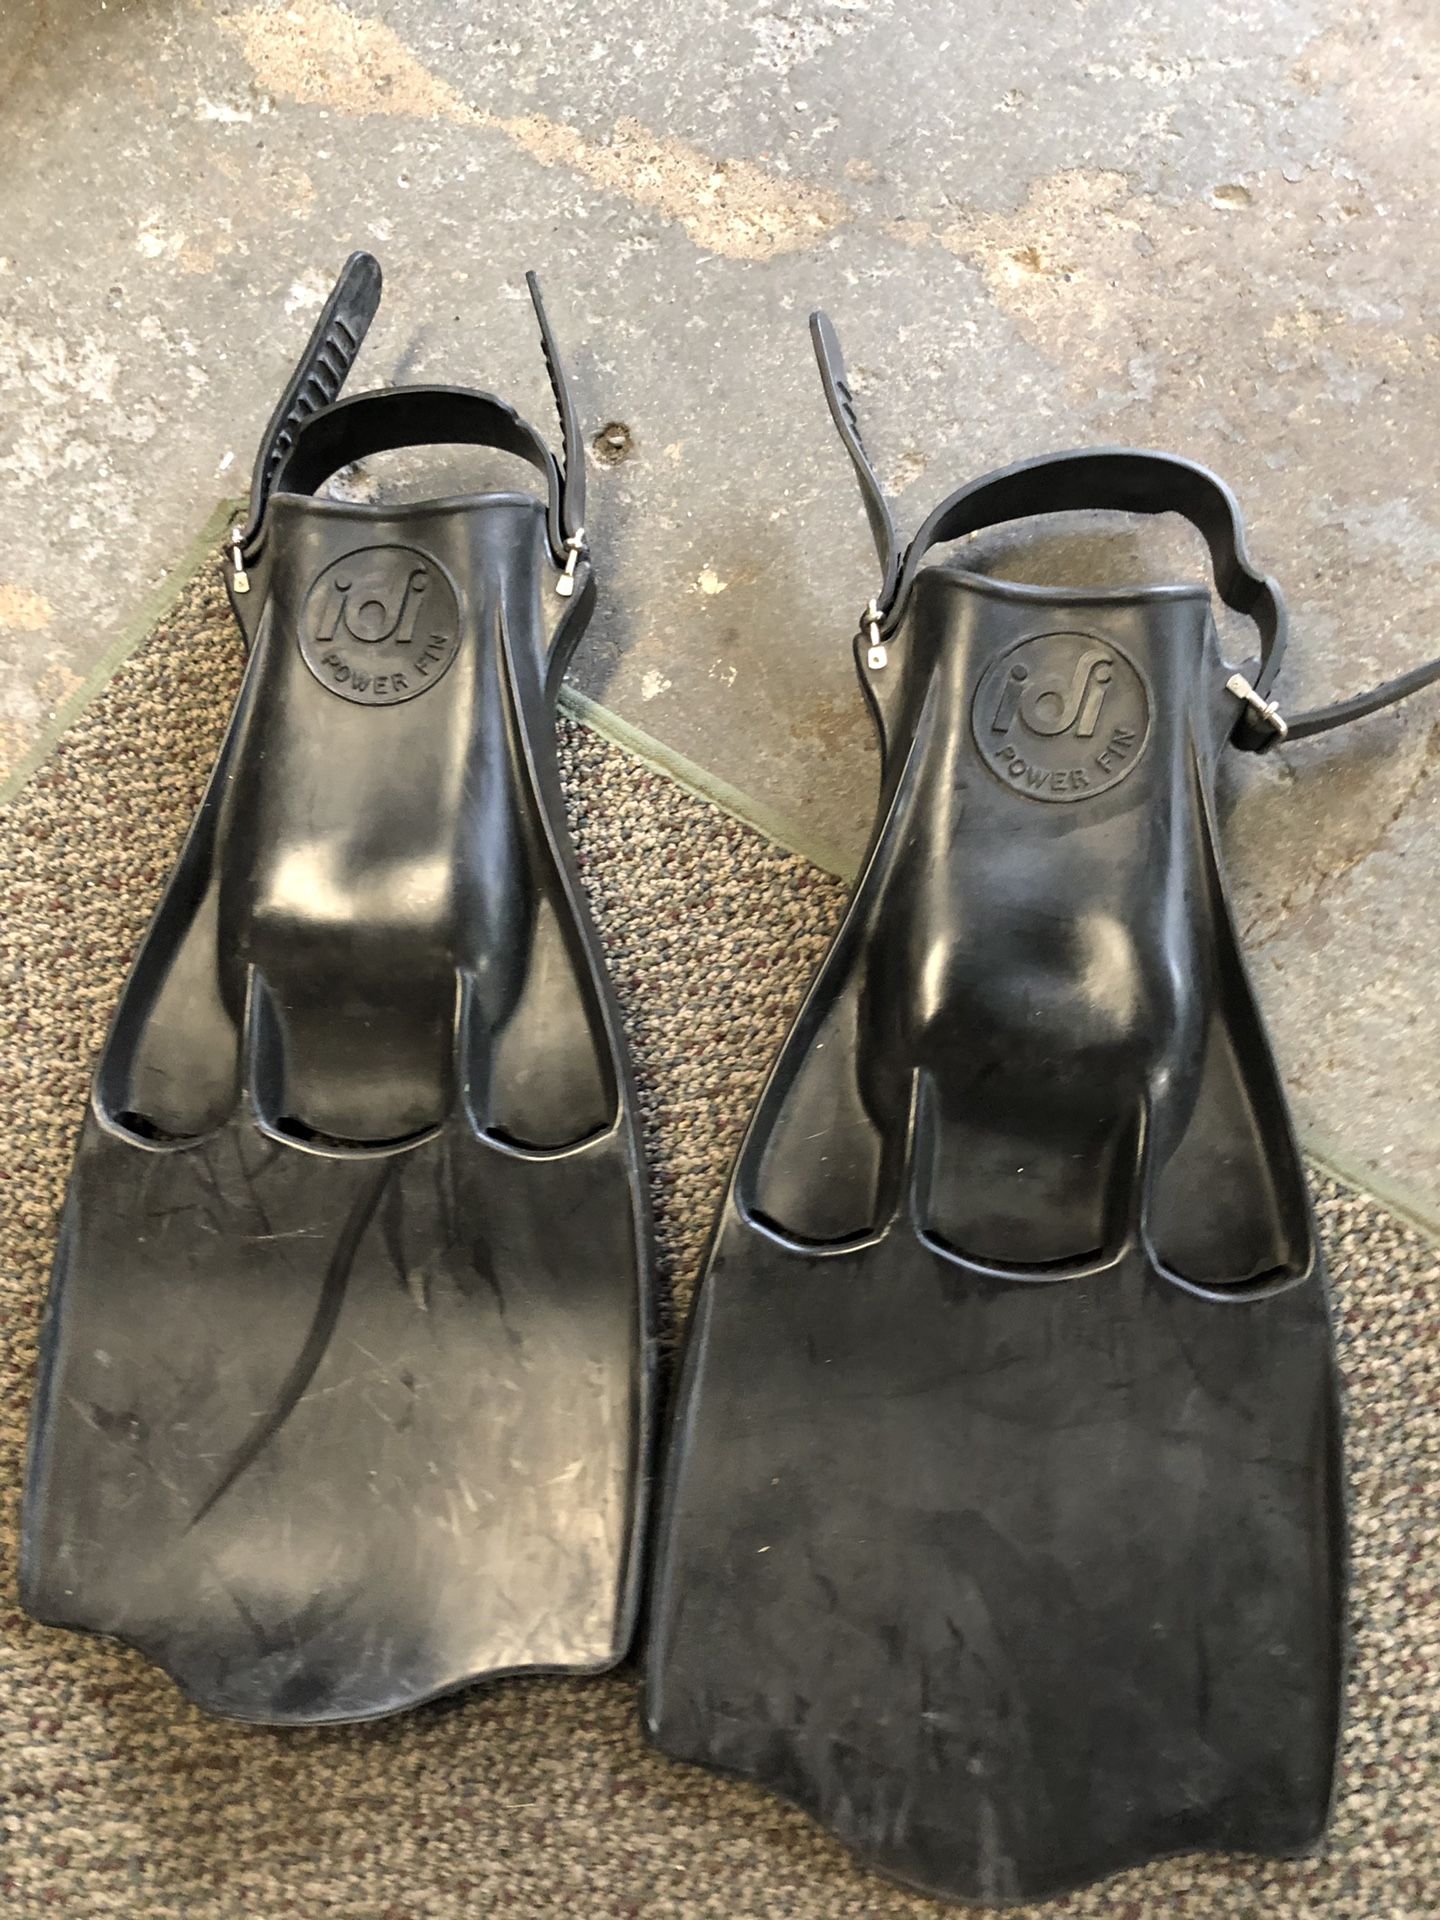 Scuba diving flippers two pairs 40 bucksOr make offer